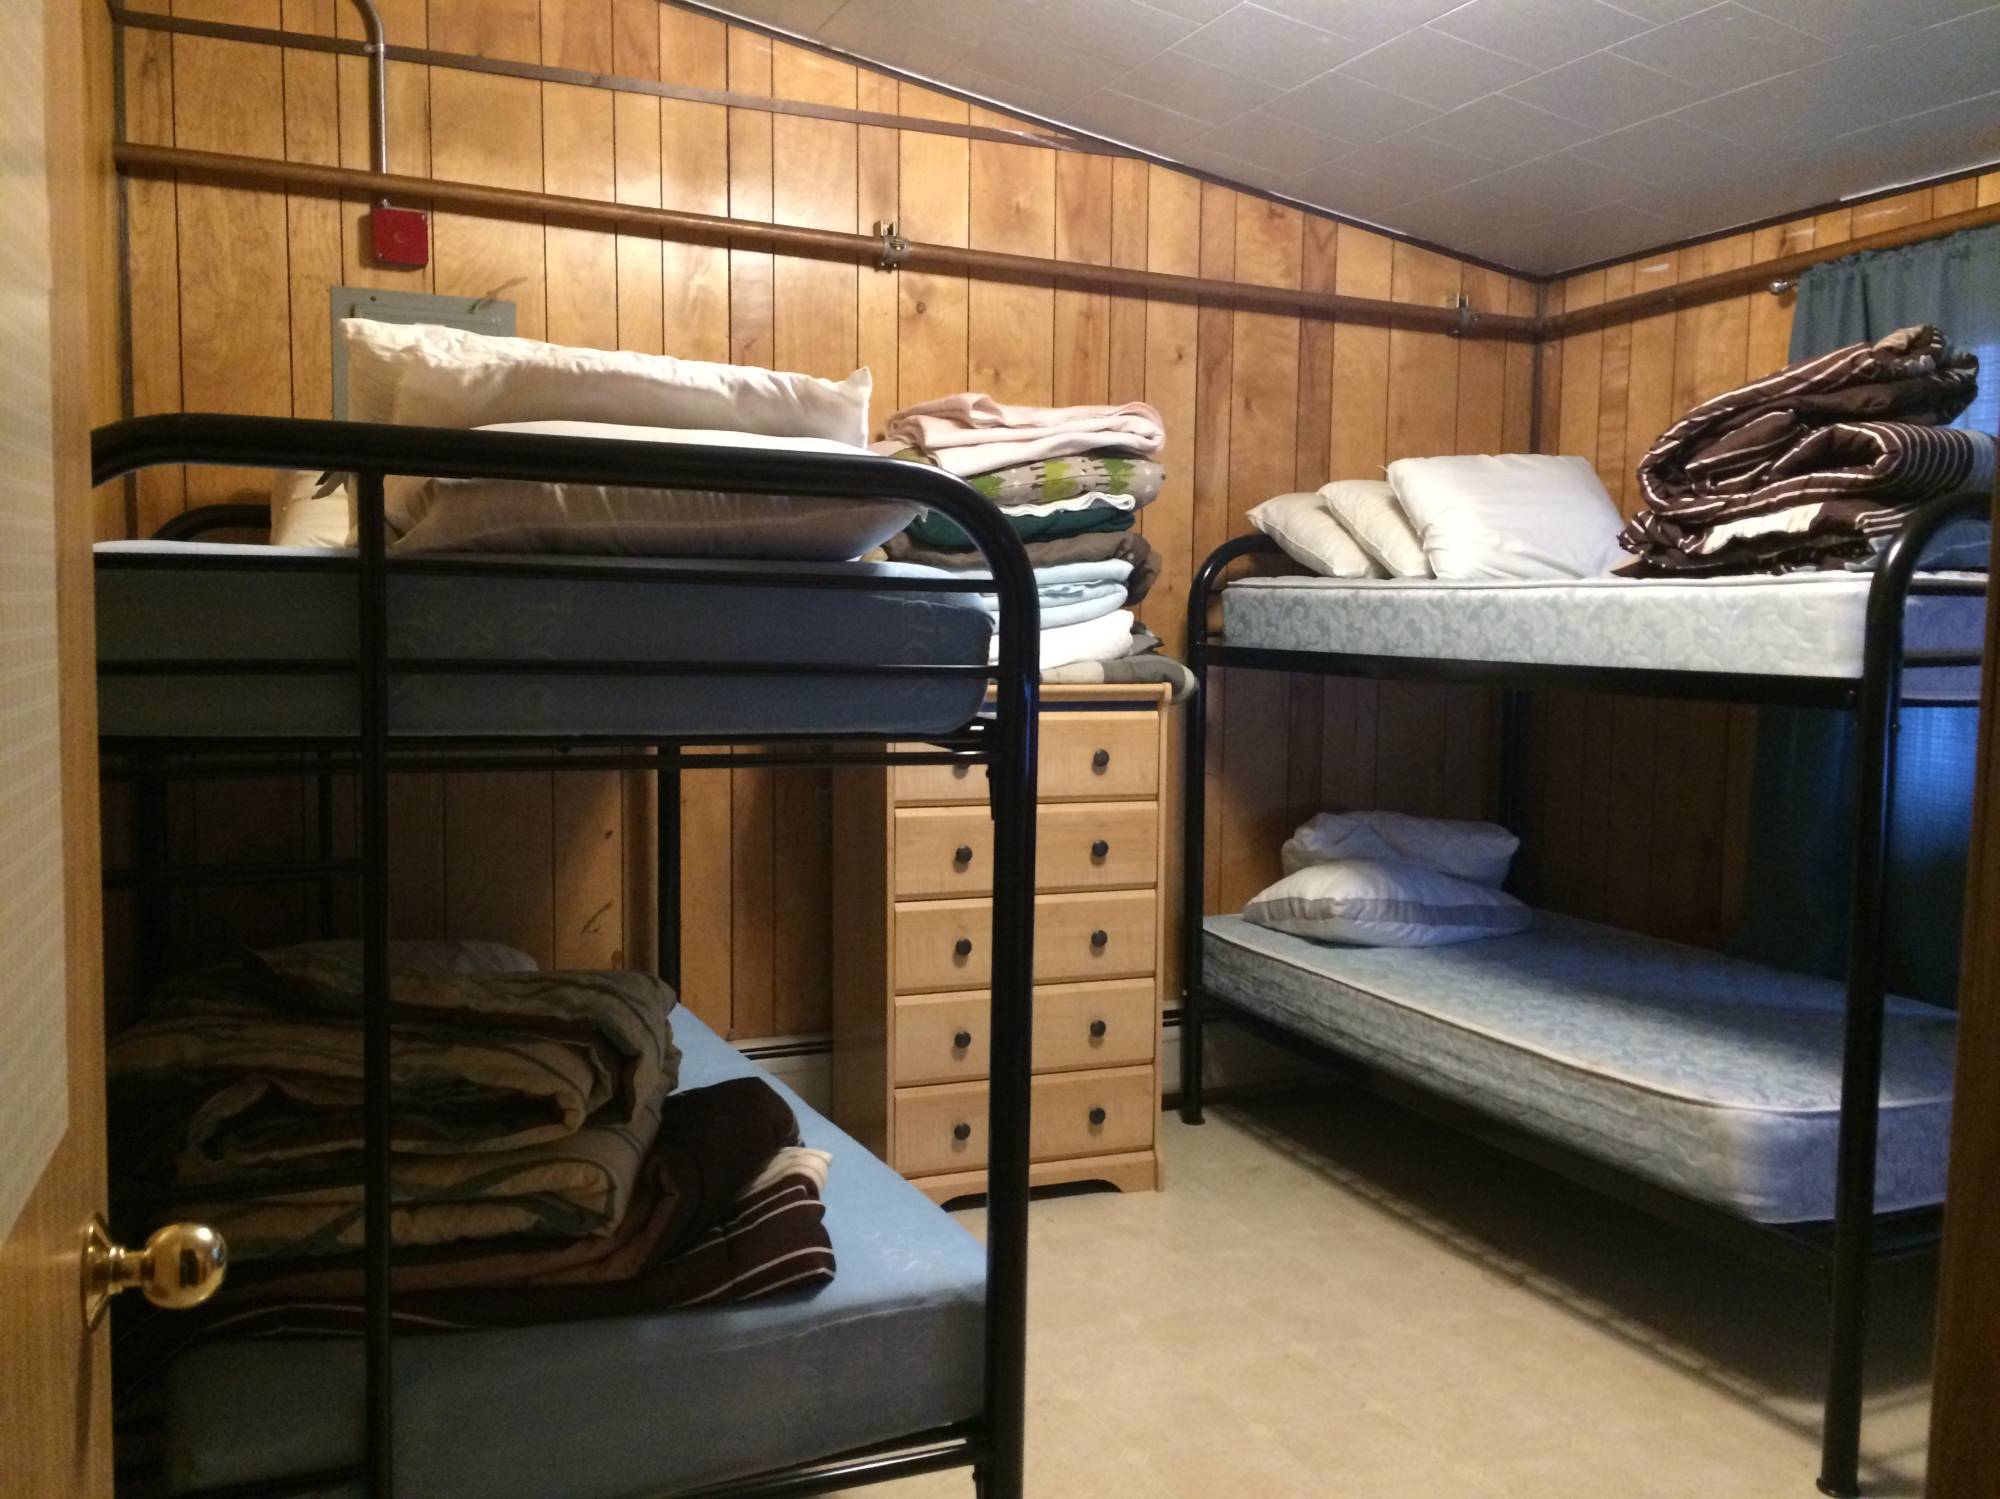 Bedroom in Atqasuk house with two bunk beds.